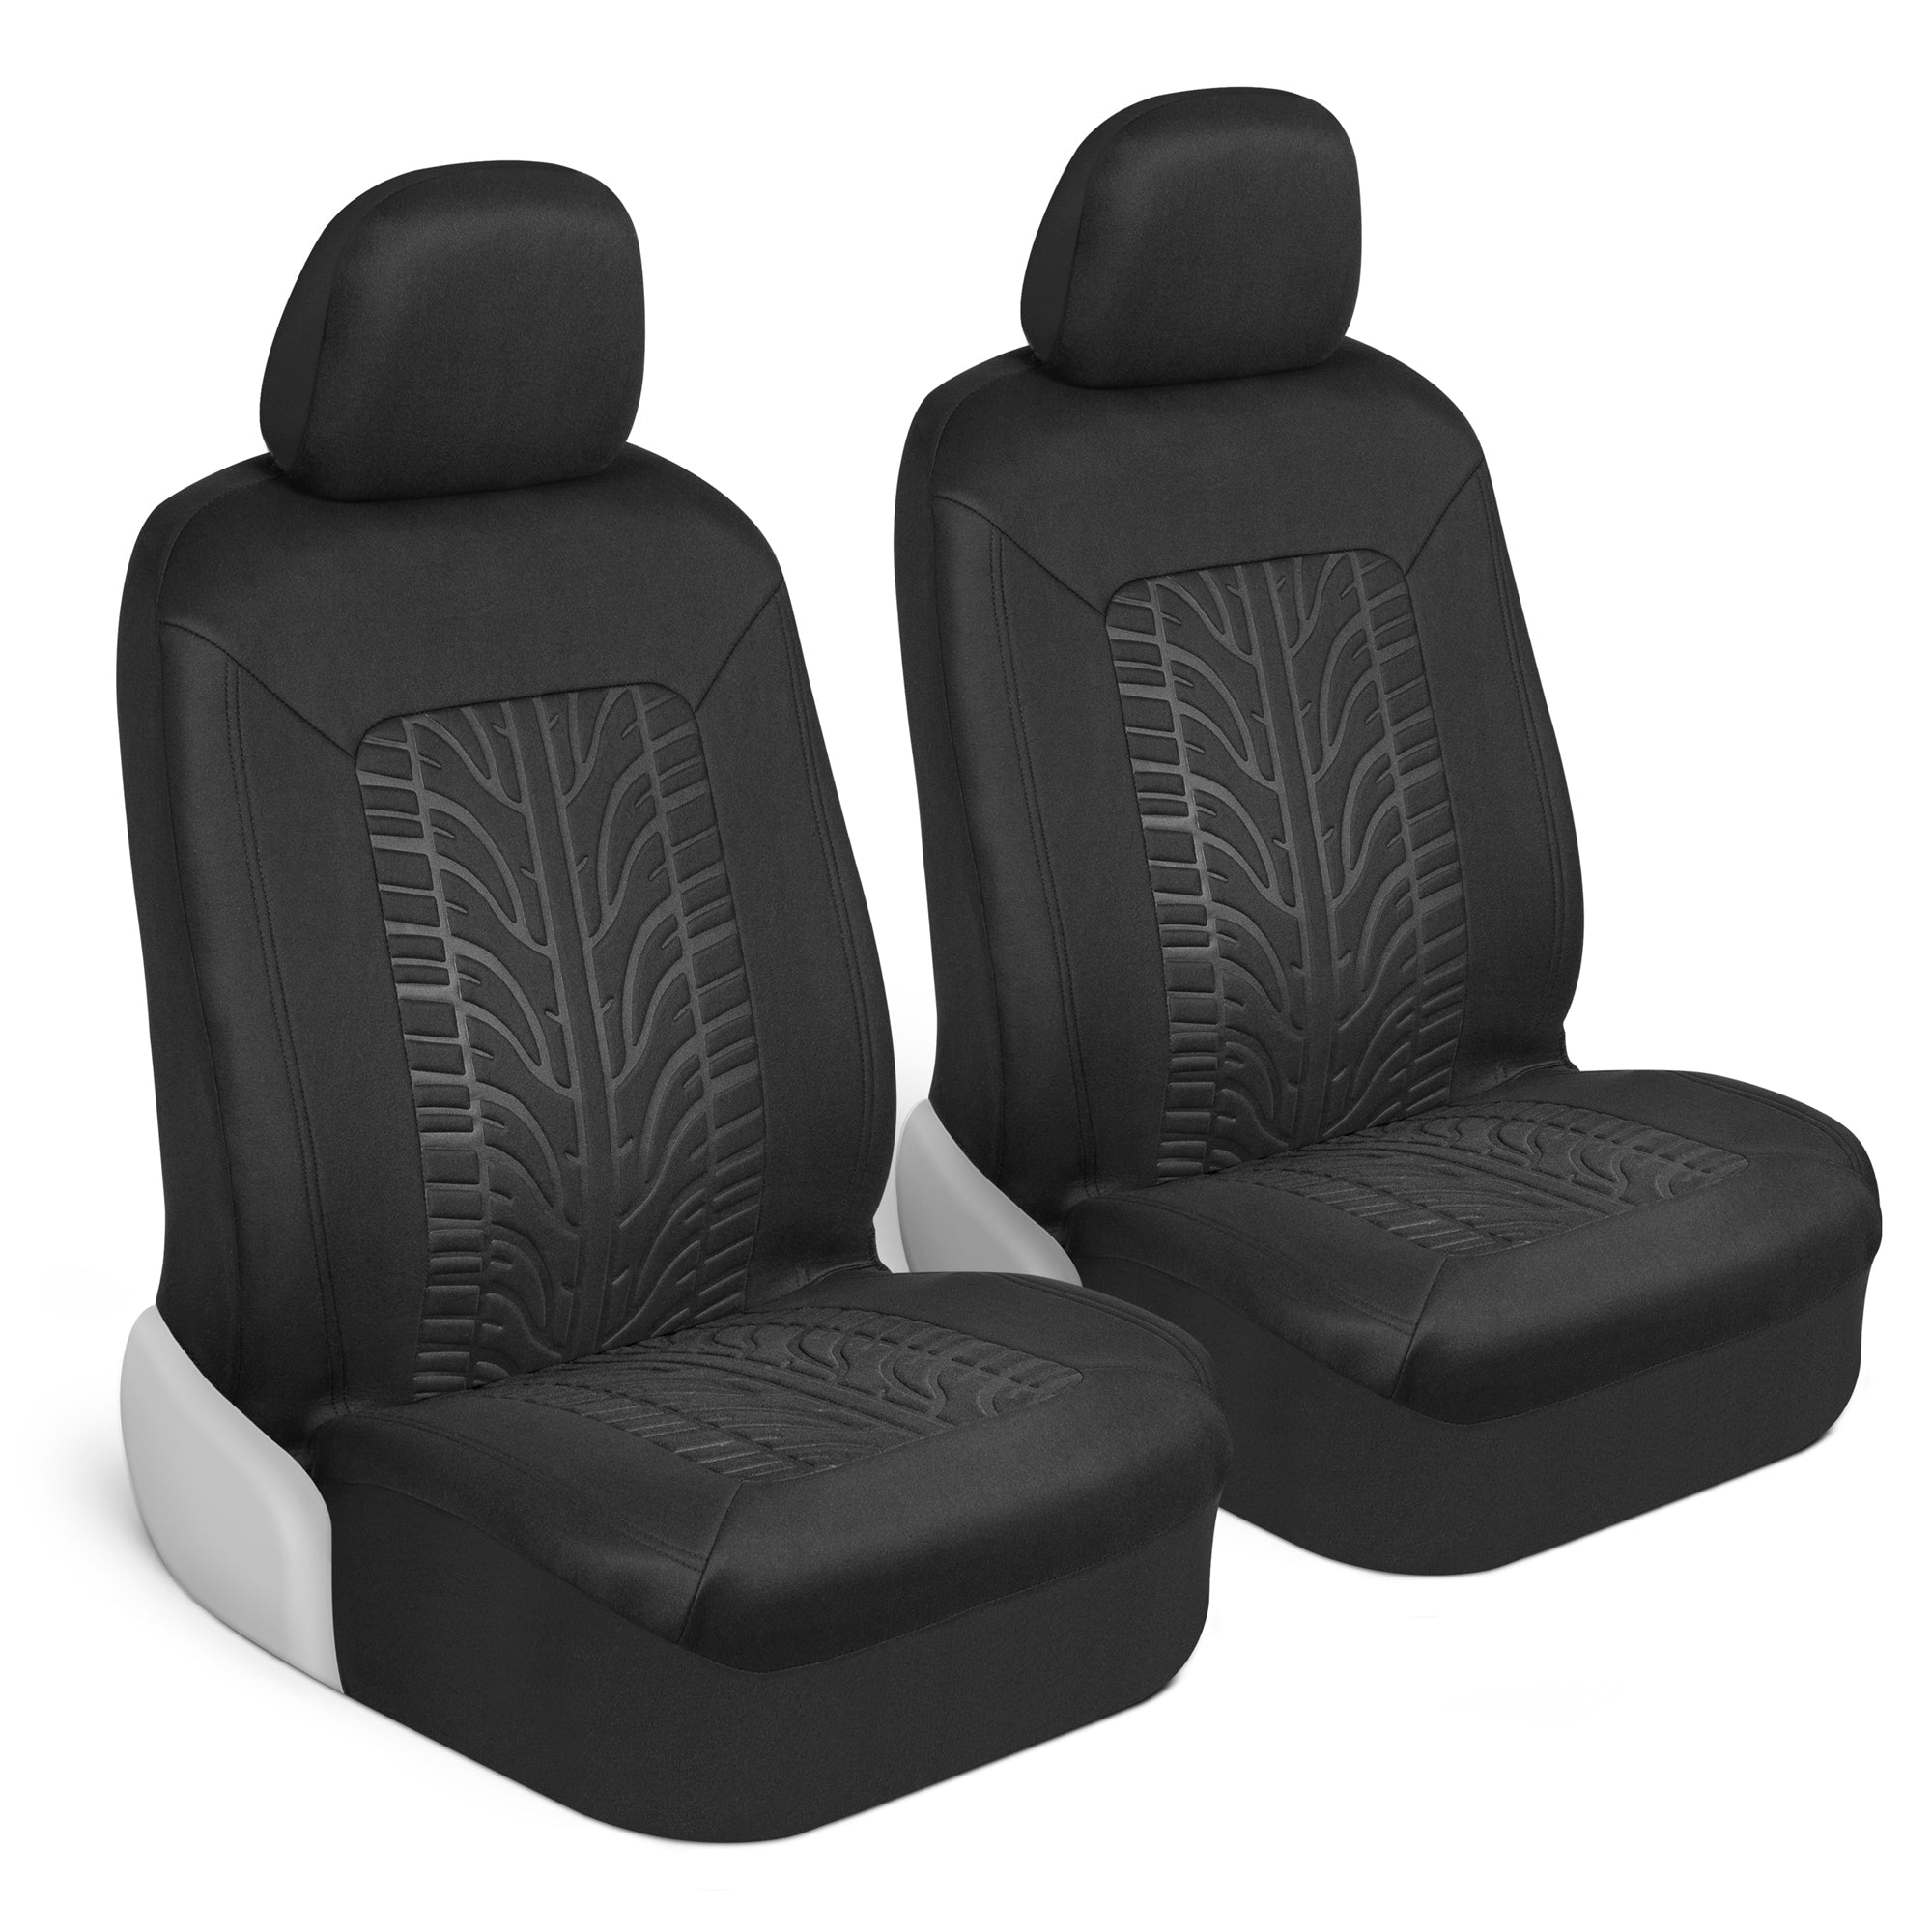 Motor Trend GrandPrix Seat Covers for Cars, Black Tire Tread Embossed Car Seat Covers for Front Seats, Automotive Interior Covers for Car Truck Van SUV, 2 Count (Pack of 1) - Black